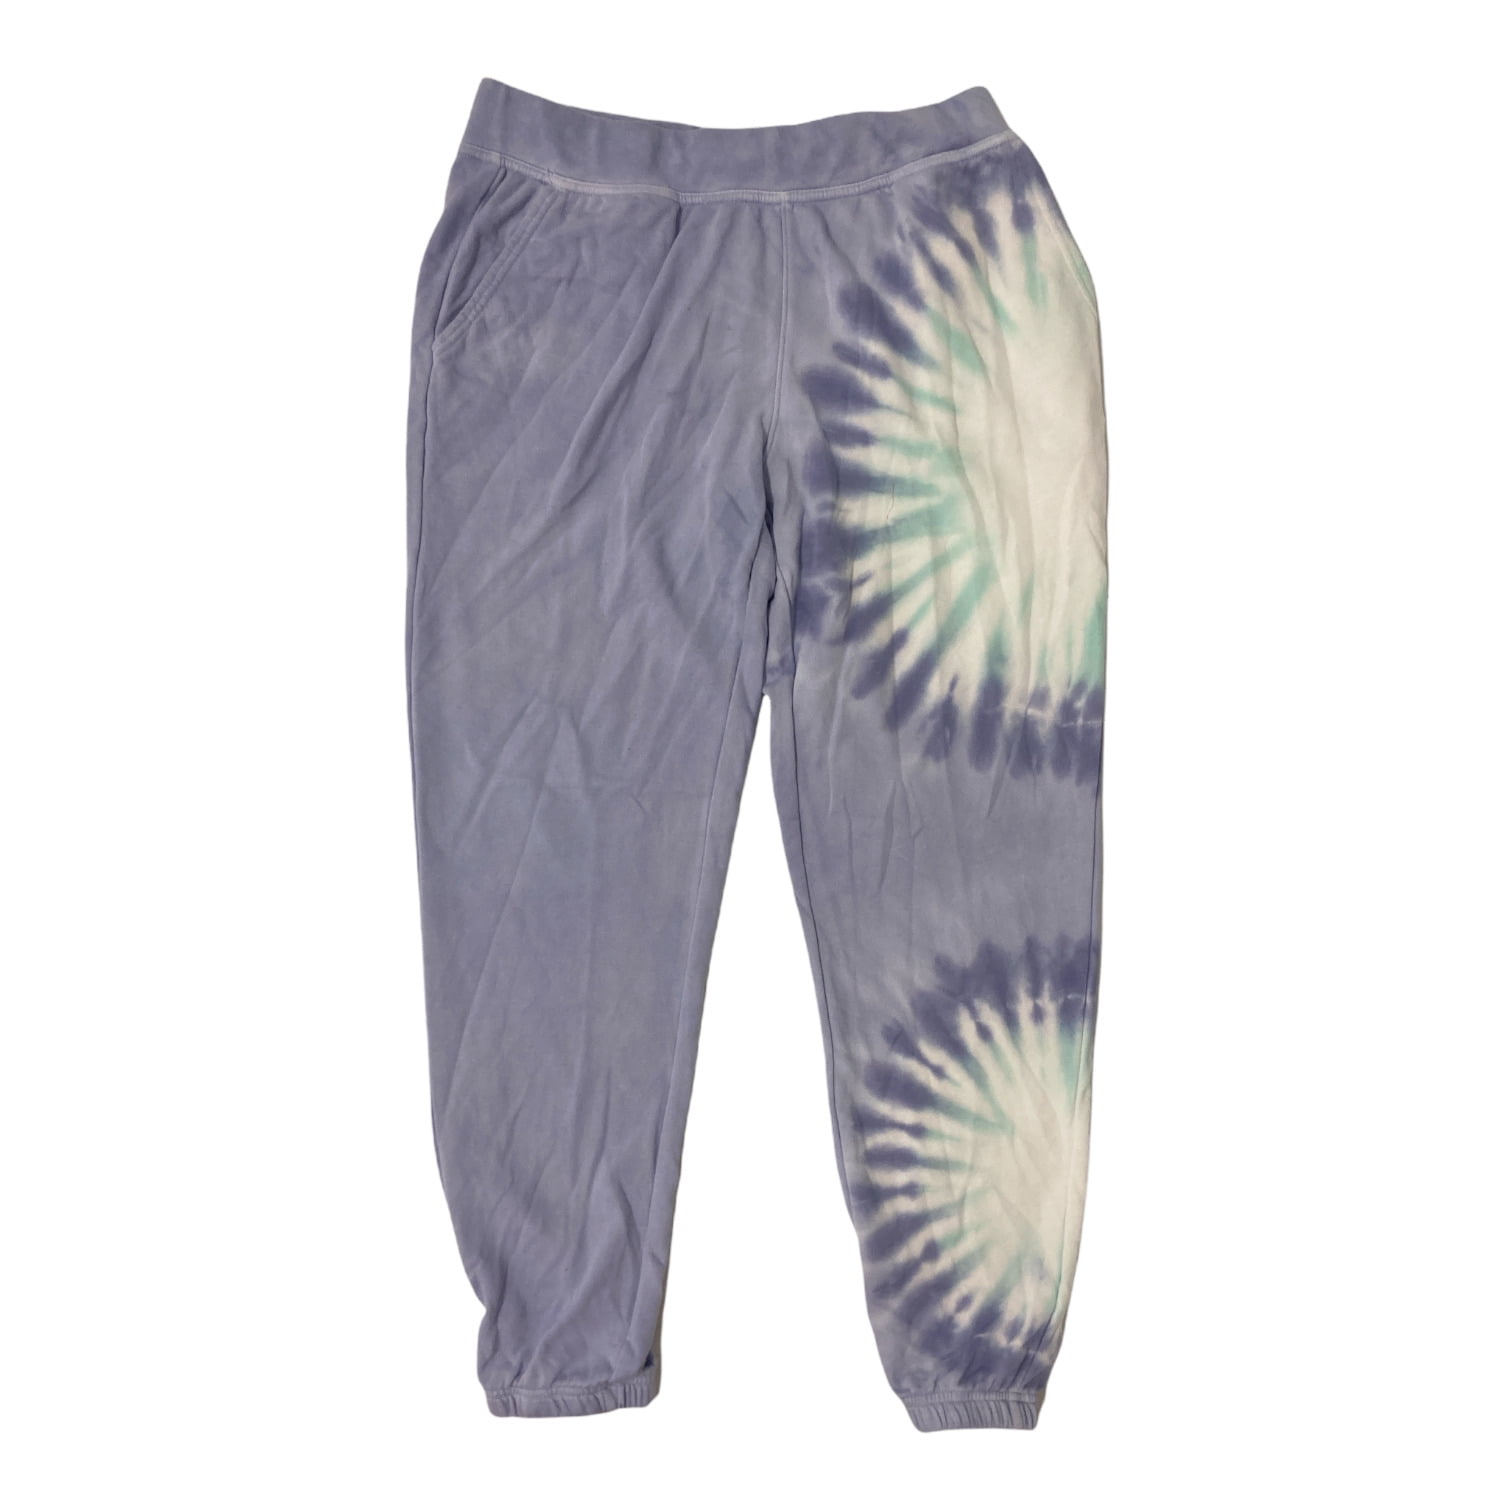 Wildfox Women's French Terry Relaxed Fit Tie-Dye Jogger Sweatpants ...